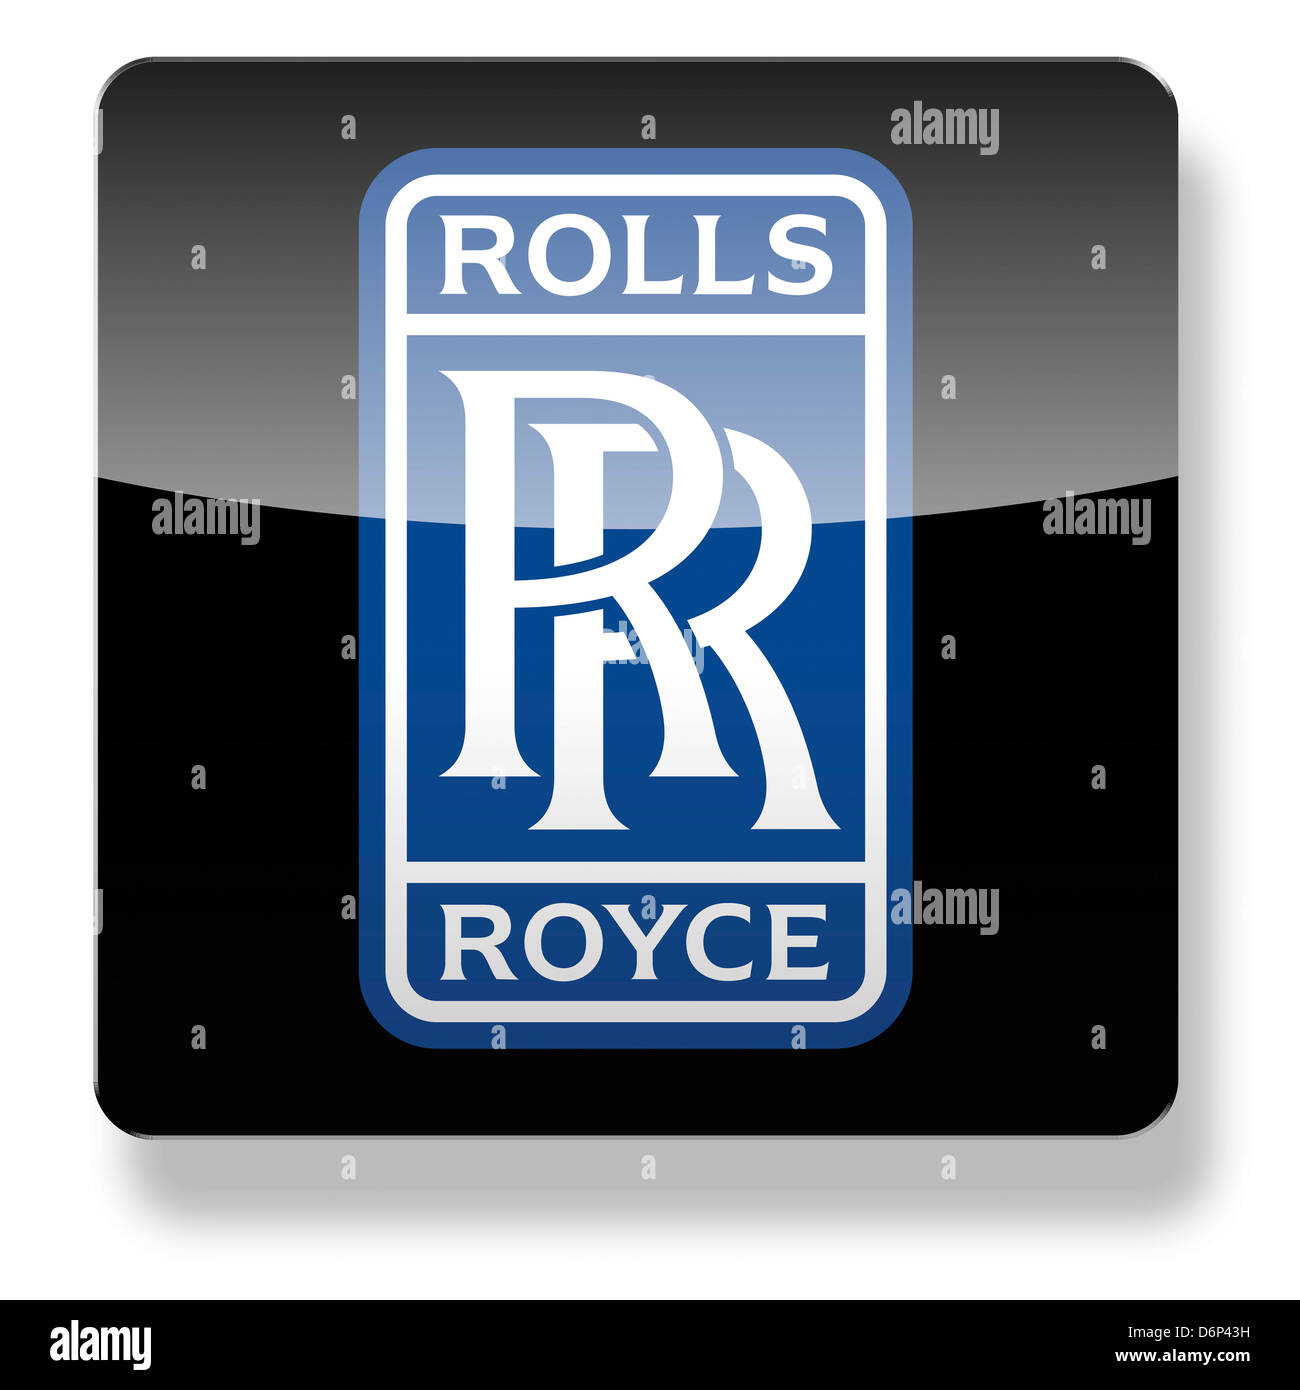 Rolls Royce logo as an app icon. Clipping path included. Stock Photo